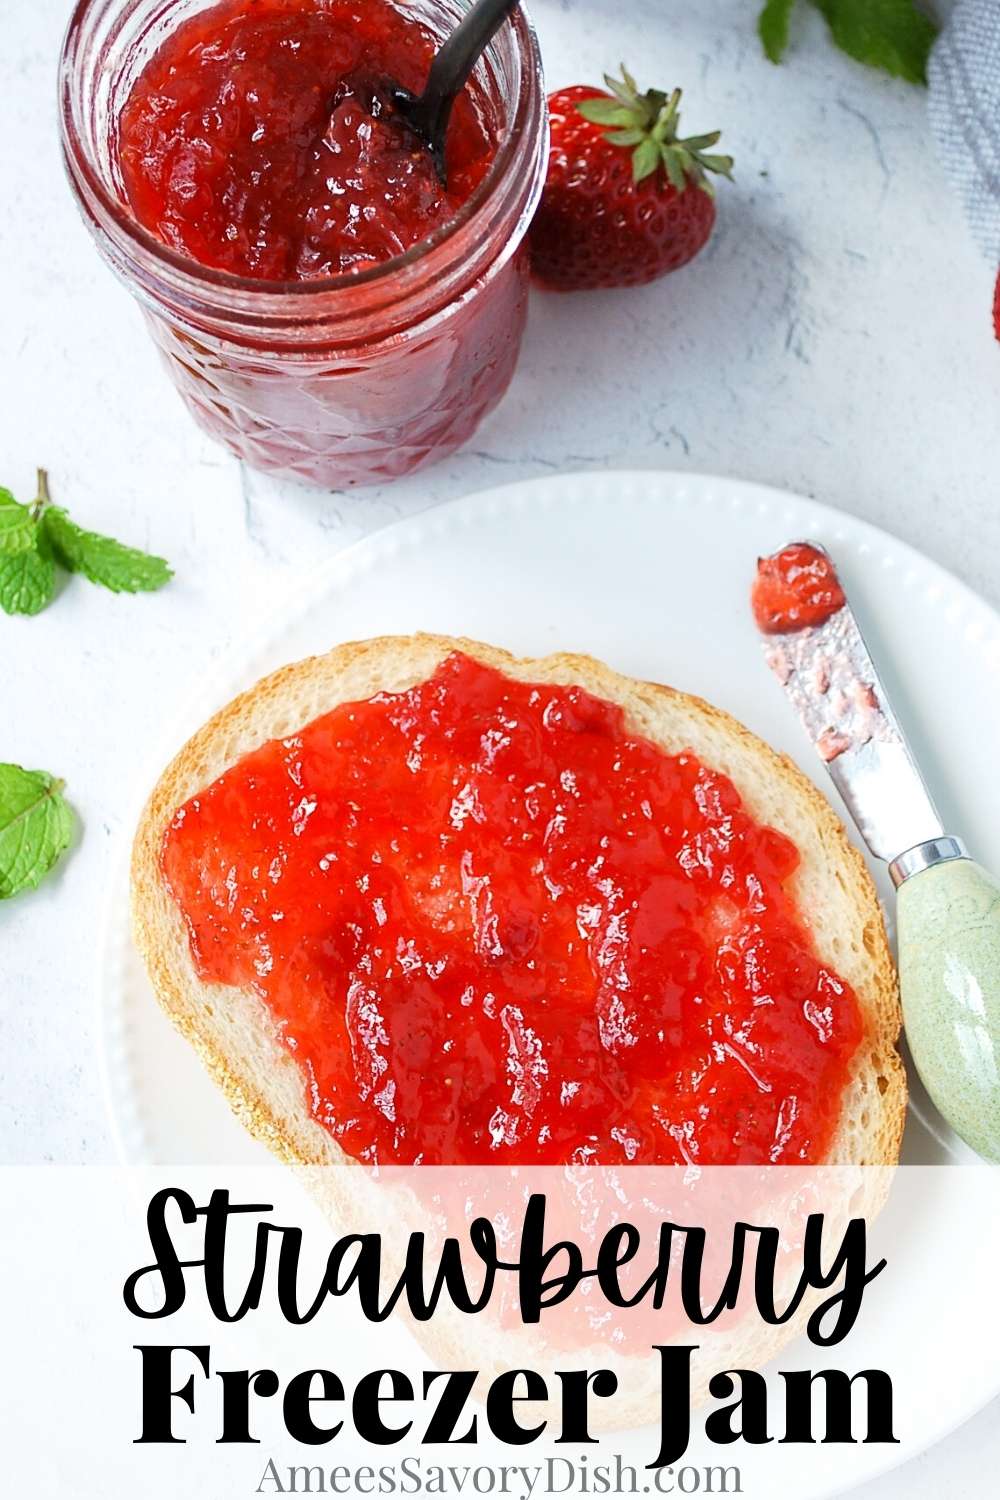 This Strawberry Freezer Jam low sugar recipe will show you how quick and easy it is to make a delicious reduced sugar homemade strawberry jam with no canning. via @Ameessavorydish